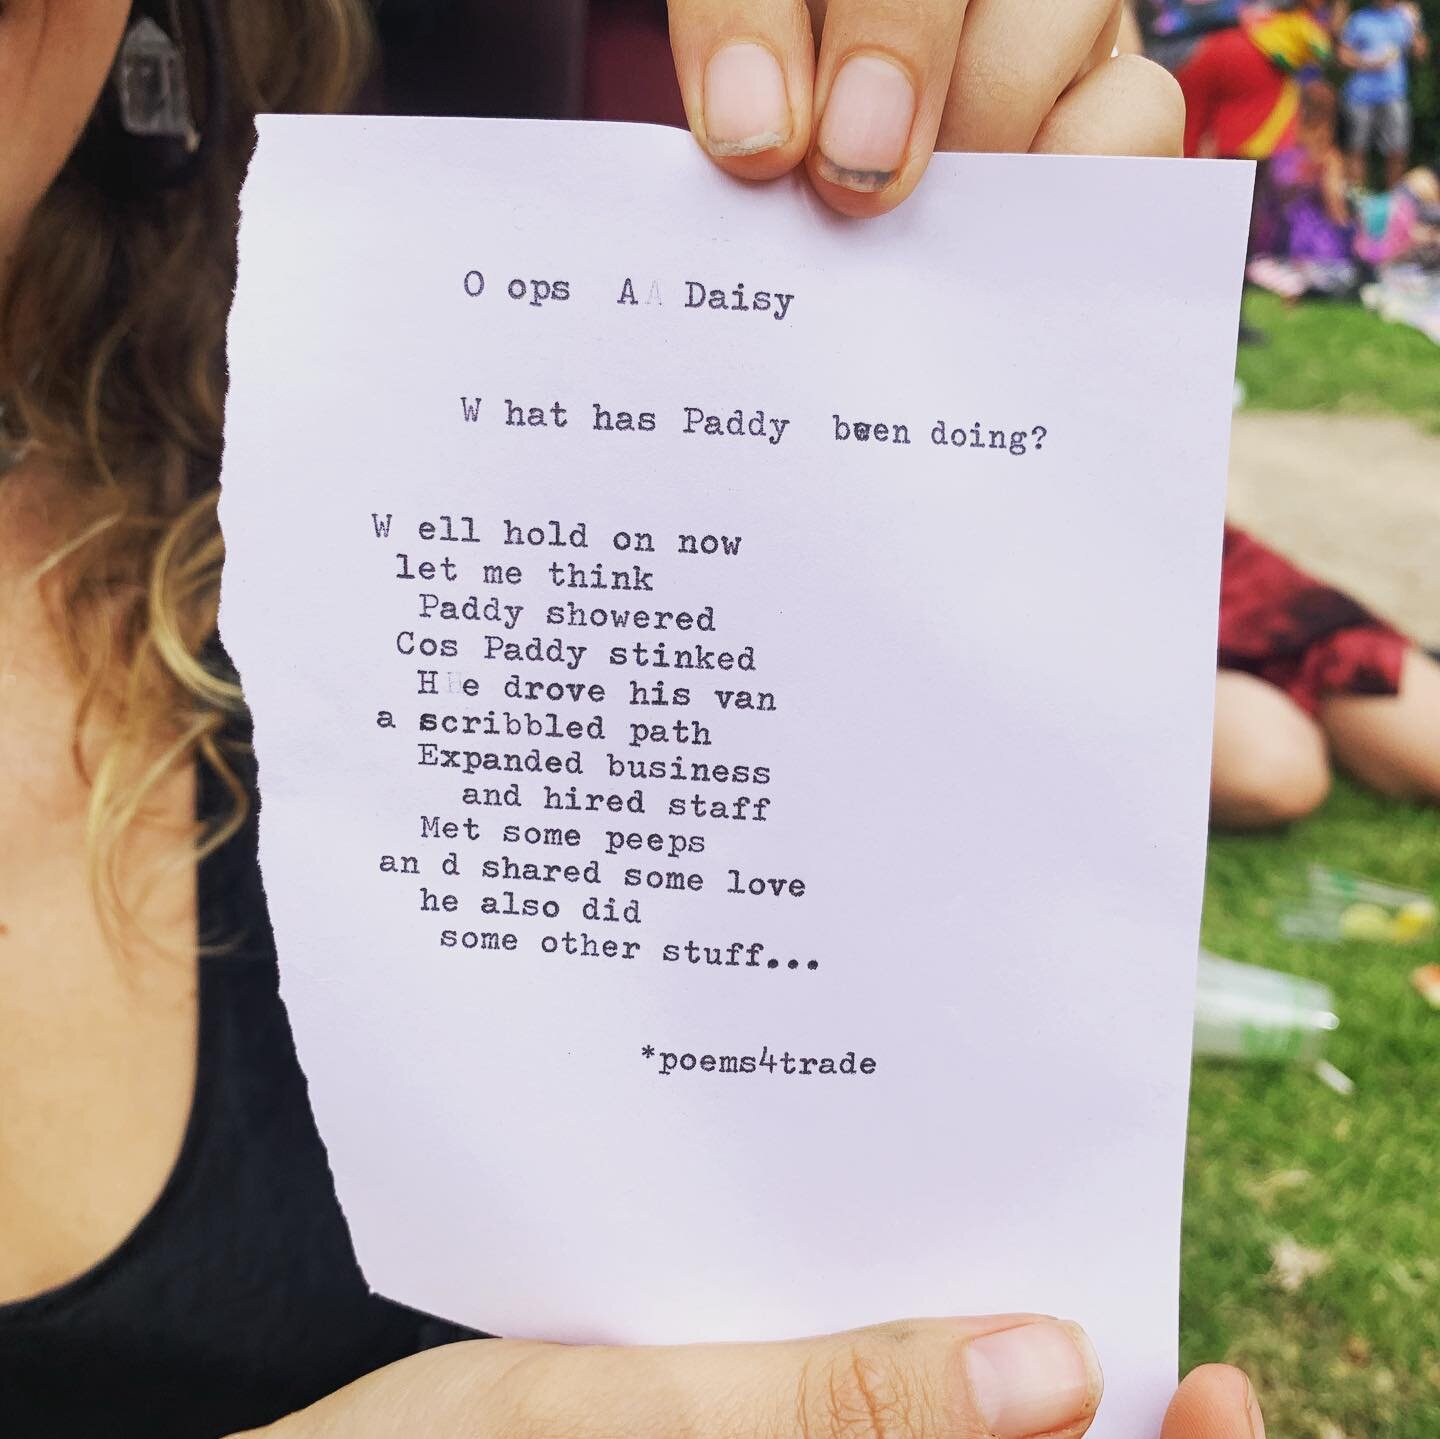 What has Paddy been doing?
After a year away, a poetic summary of my time for a friend who just released a beautiful EP - check it out!
@neekomusic 
At Oops-A-Daisy by @culturejam_fam 
&bull;
#poetry #typewriter #freestyle #dayparty